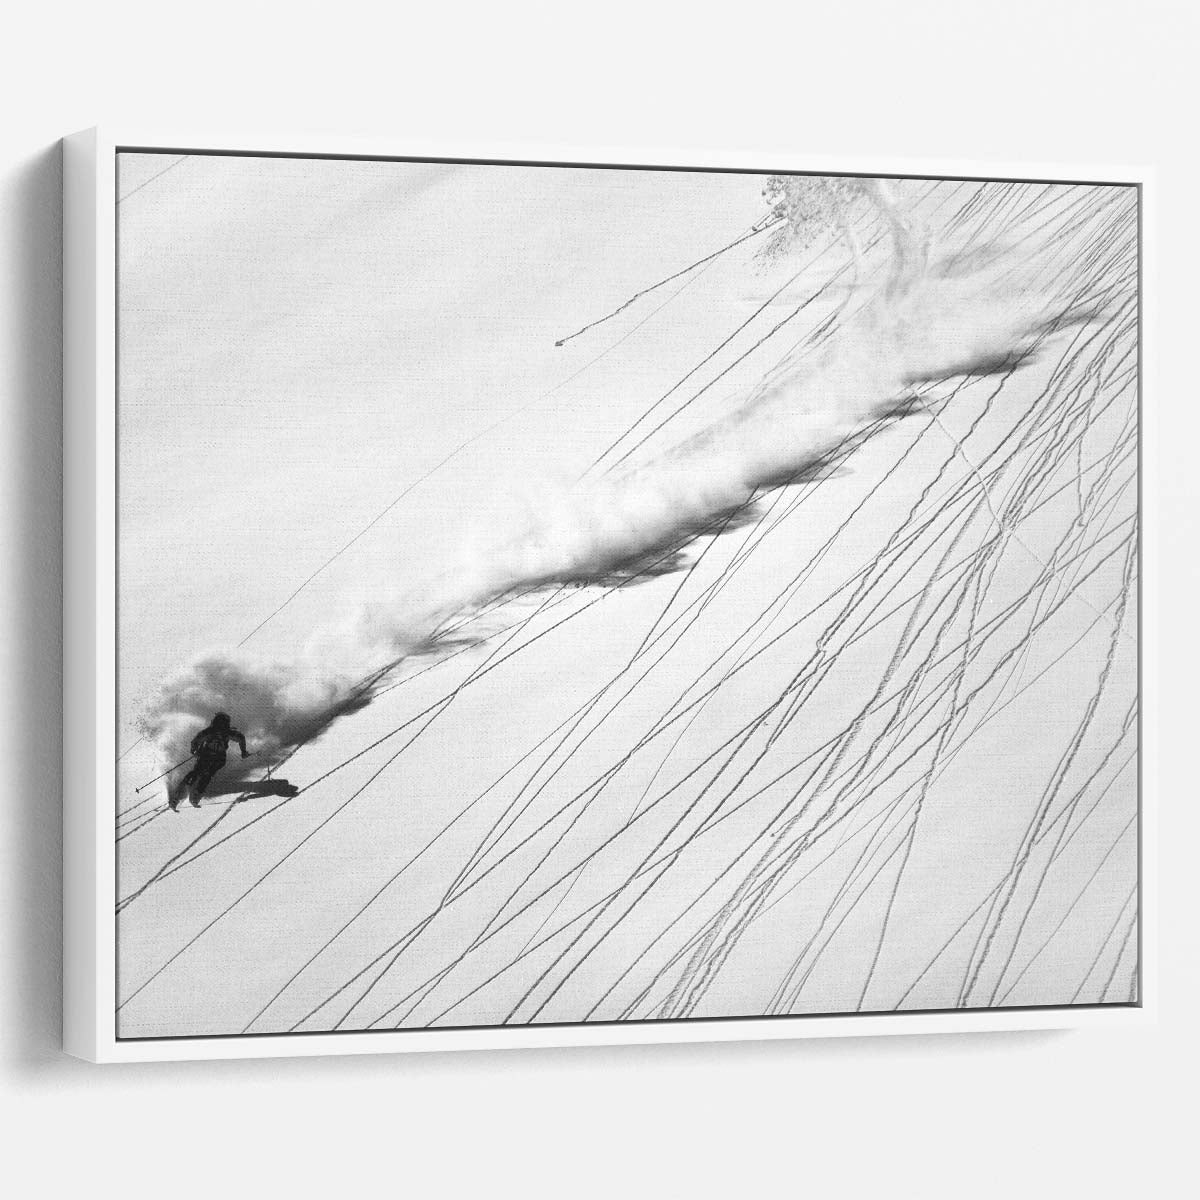 Alpine Freeride Skiing Adventure BW Wall Art by Luxuriance Designs. Made in USA.